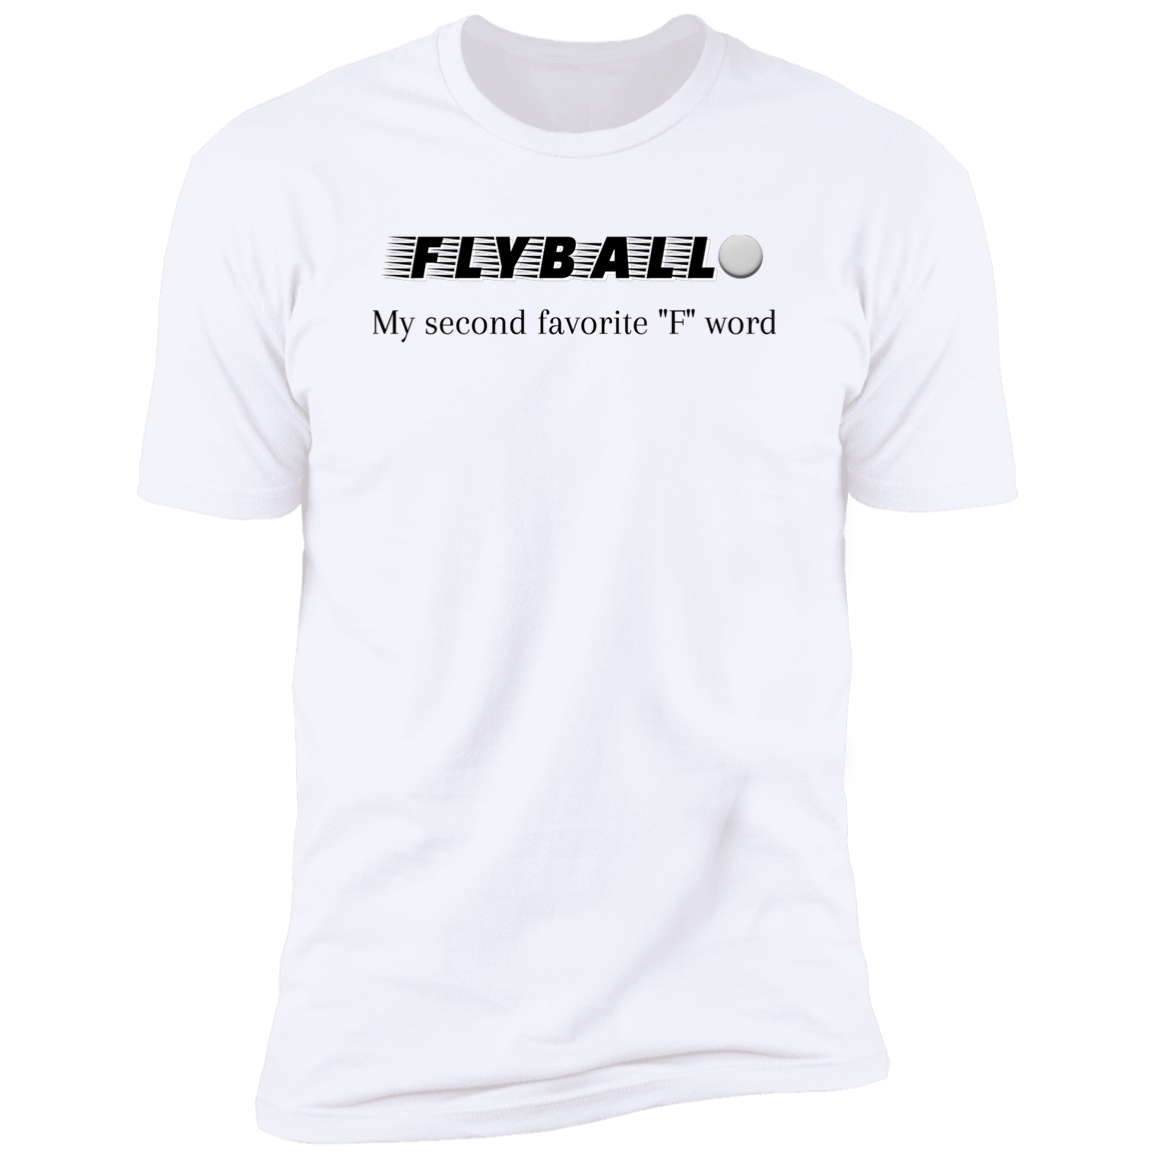 Flyball My second favorite 'f' word flyball t-shirt, dog shirt for humans, sporting dog shirt, in white